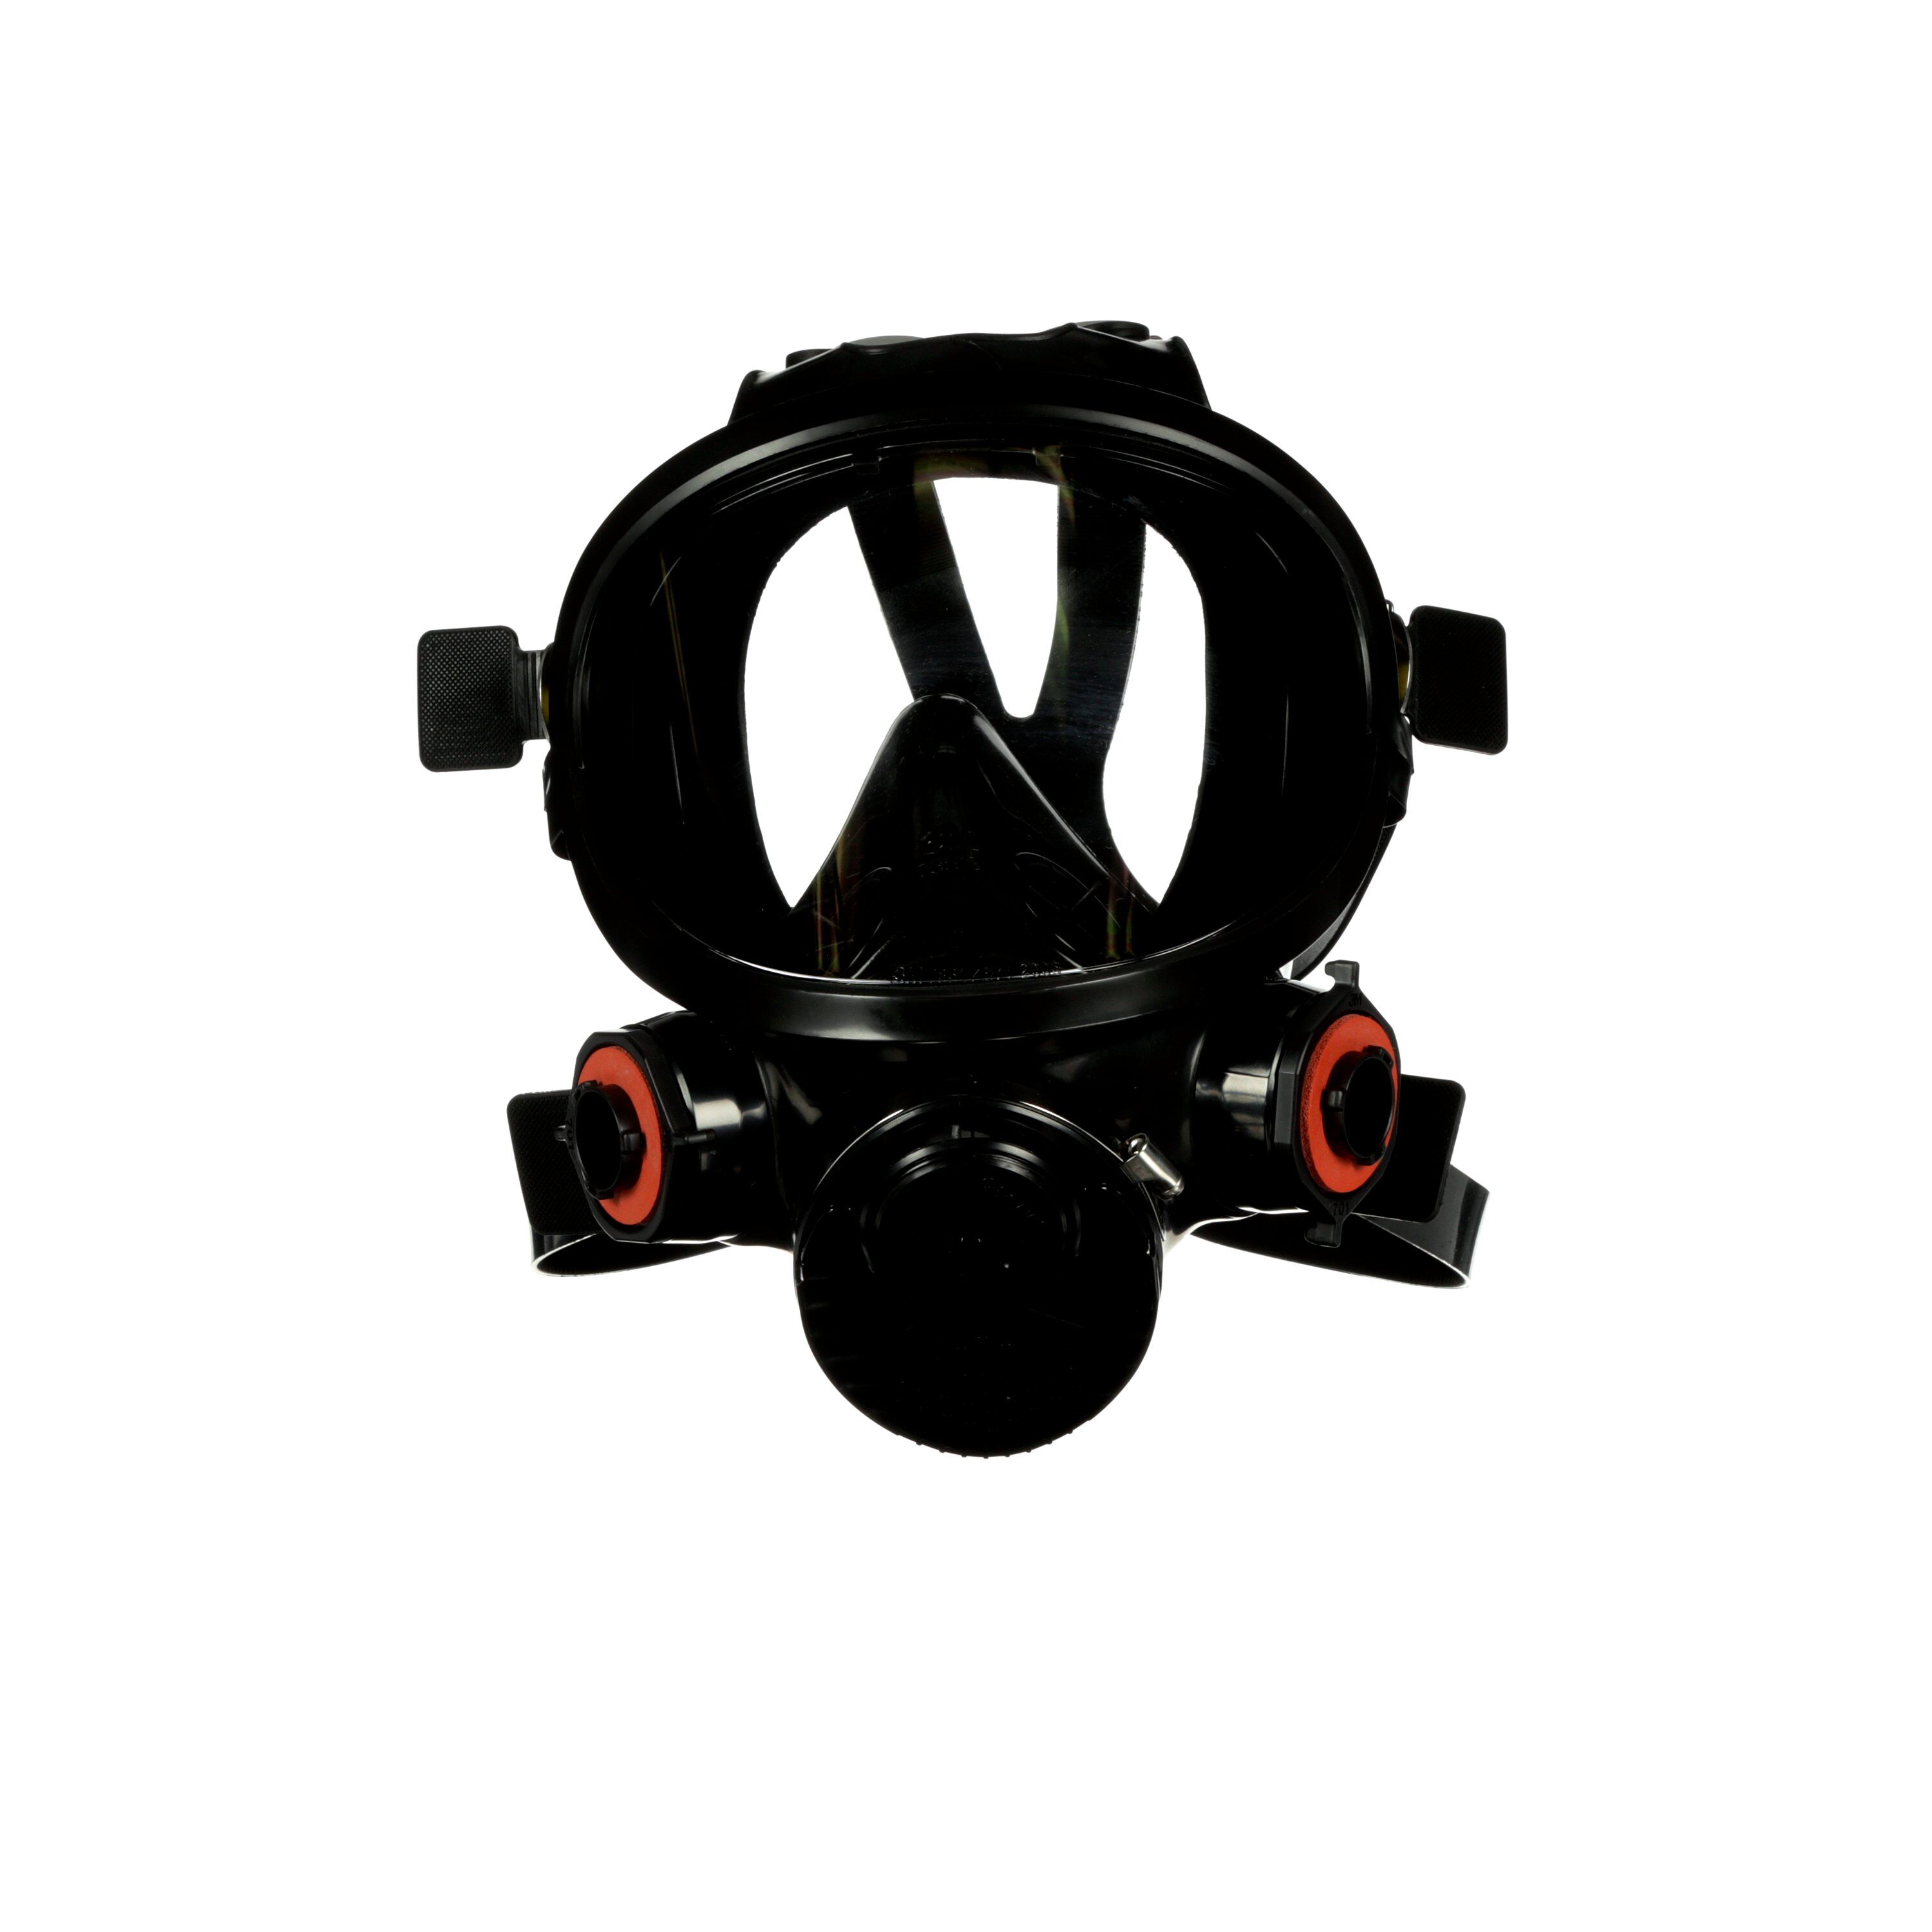 3M™ 7800S-M V Series 7800 Reusable Full Face Respirator, M, 6-Point Suspension, Bayonet/DIN Connection, Resists: Multi-Contaminants